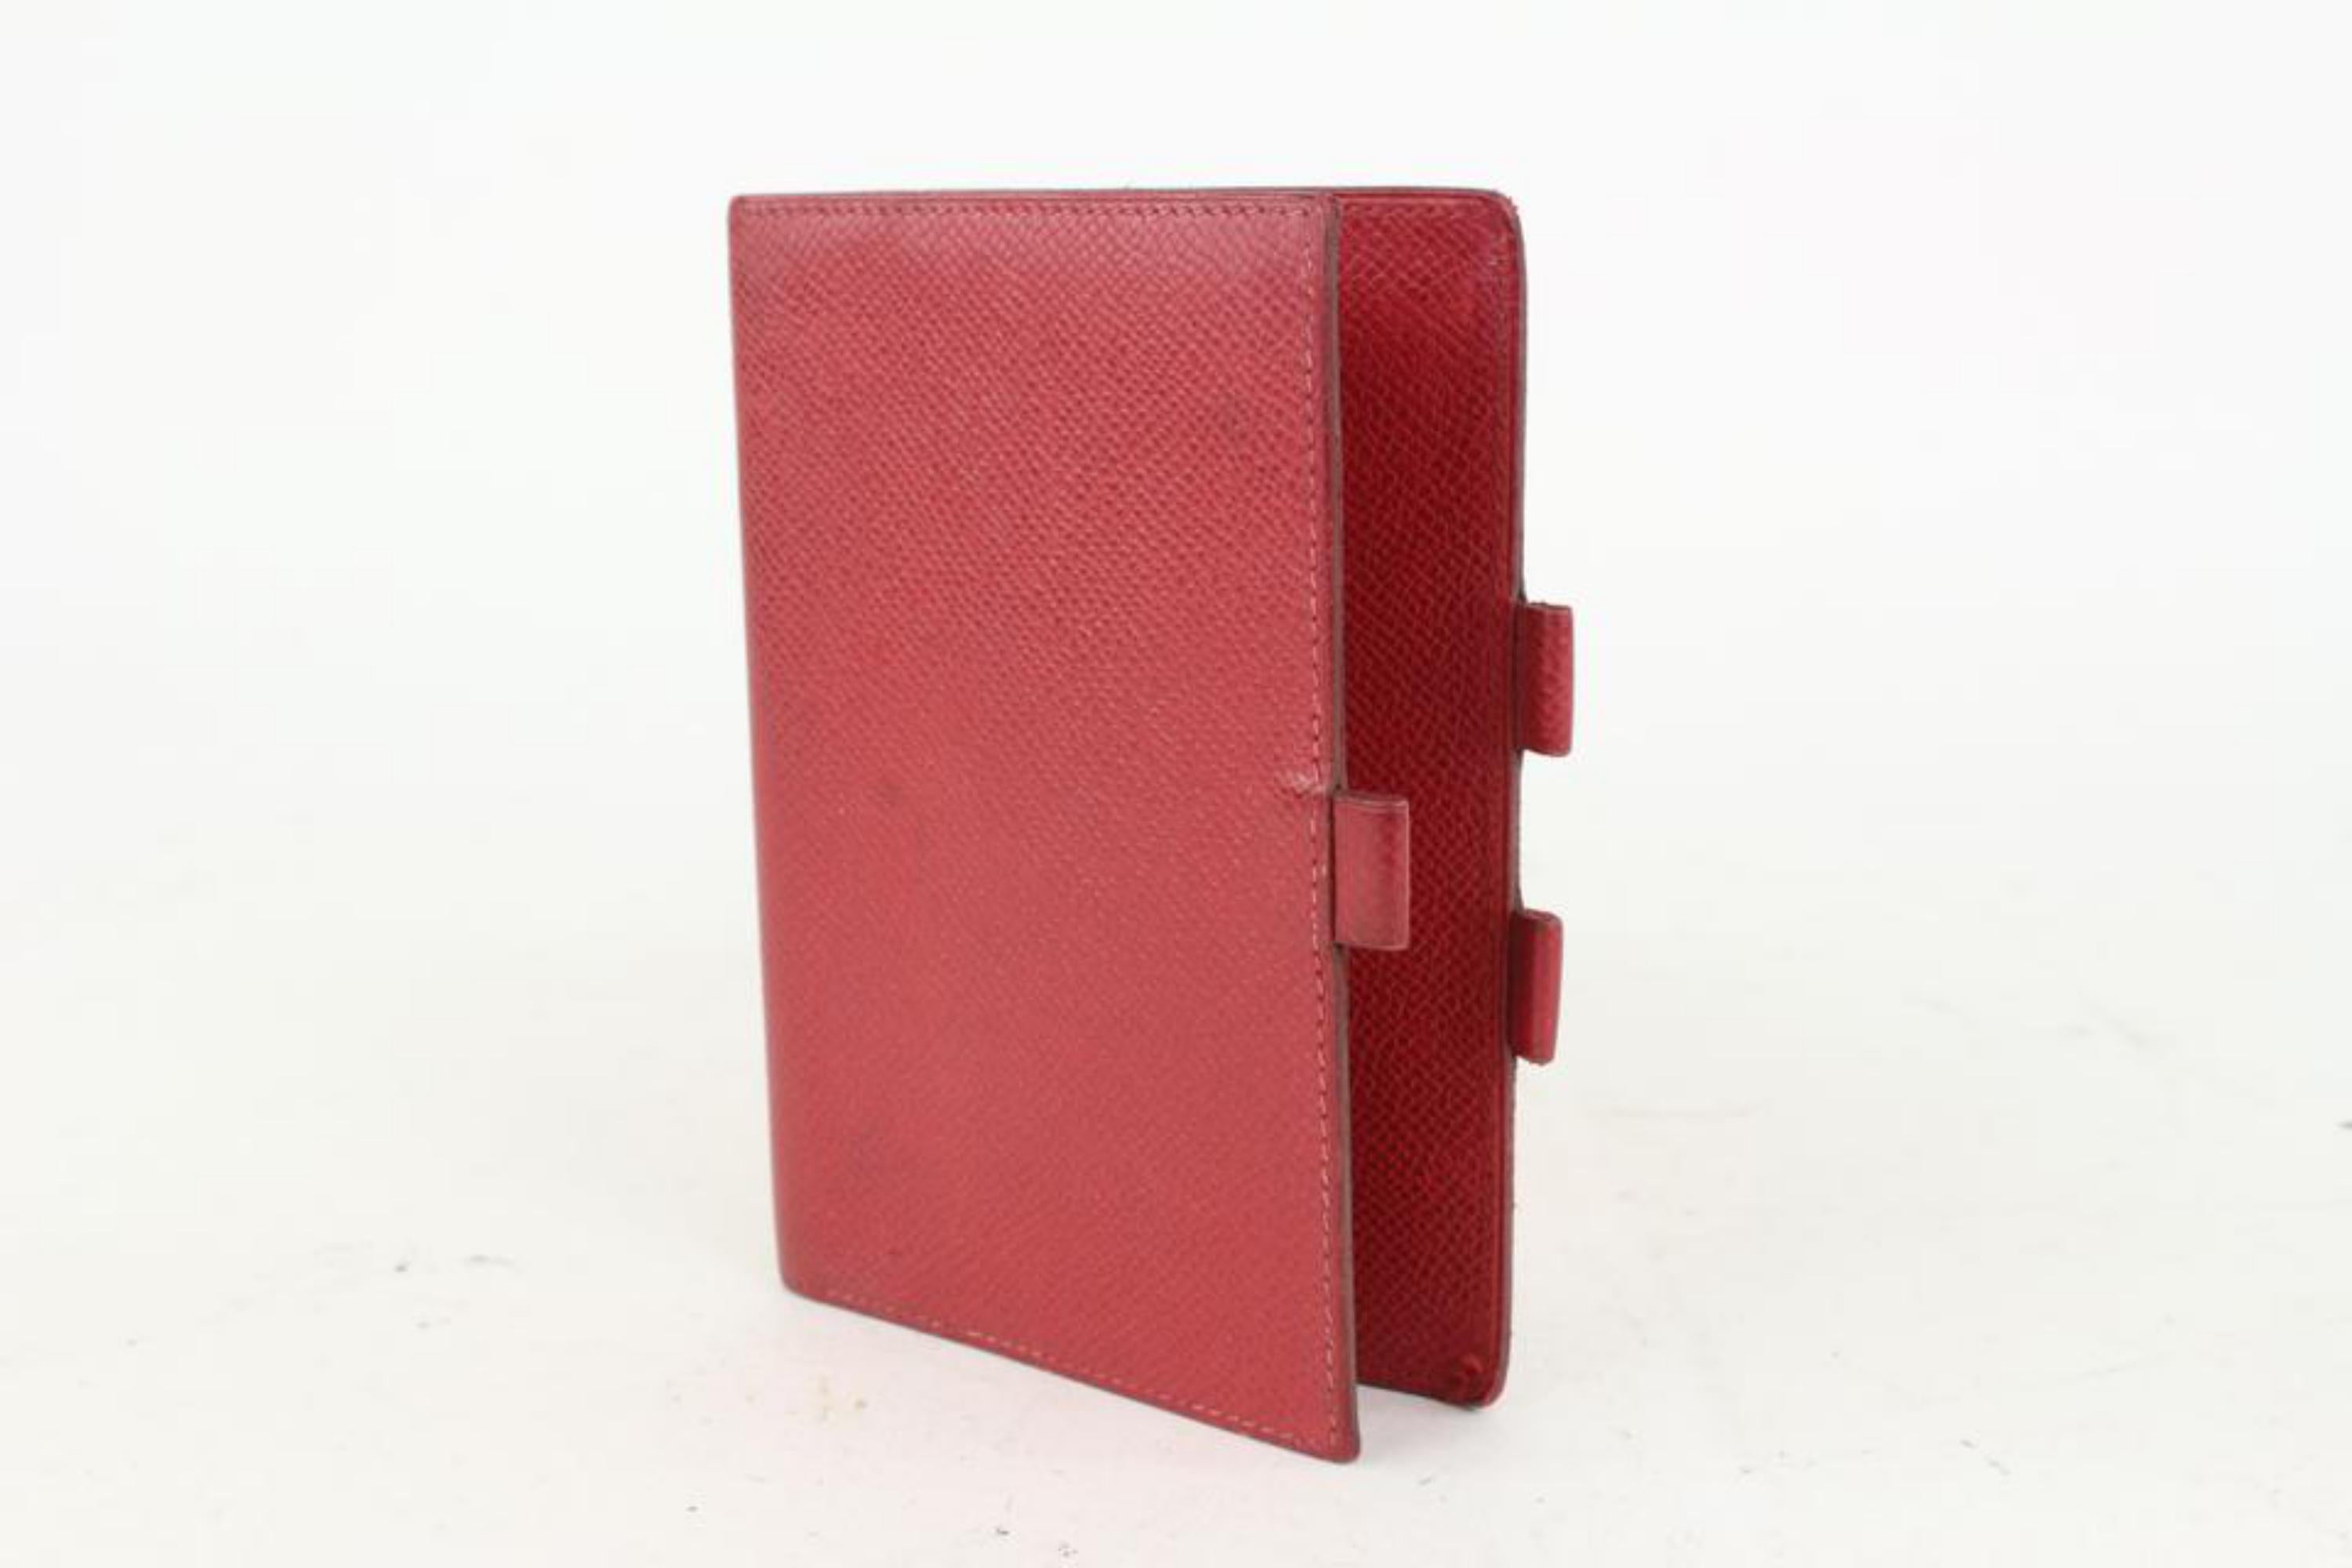 Hermès Small Red Epsom Leather Agenda 1020h36 For Sale 8